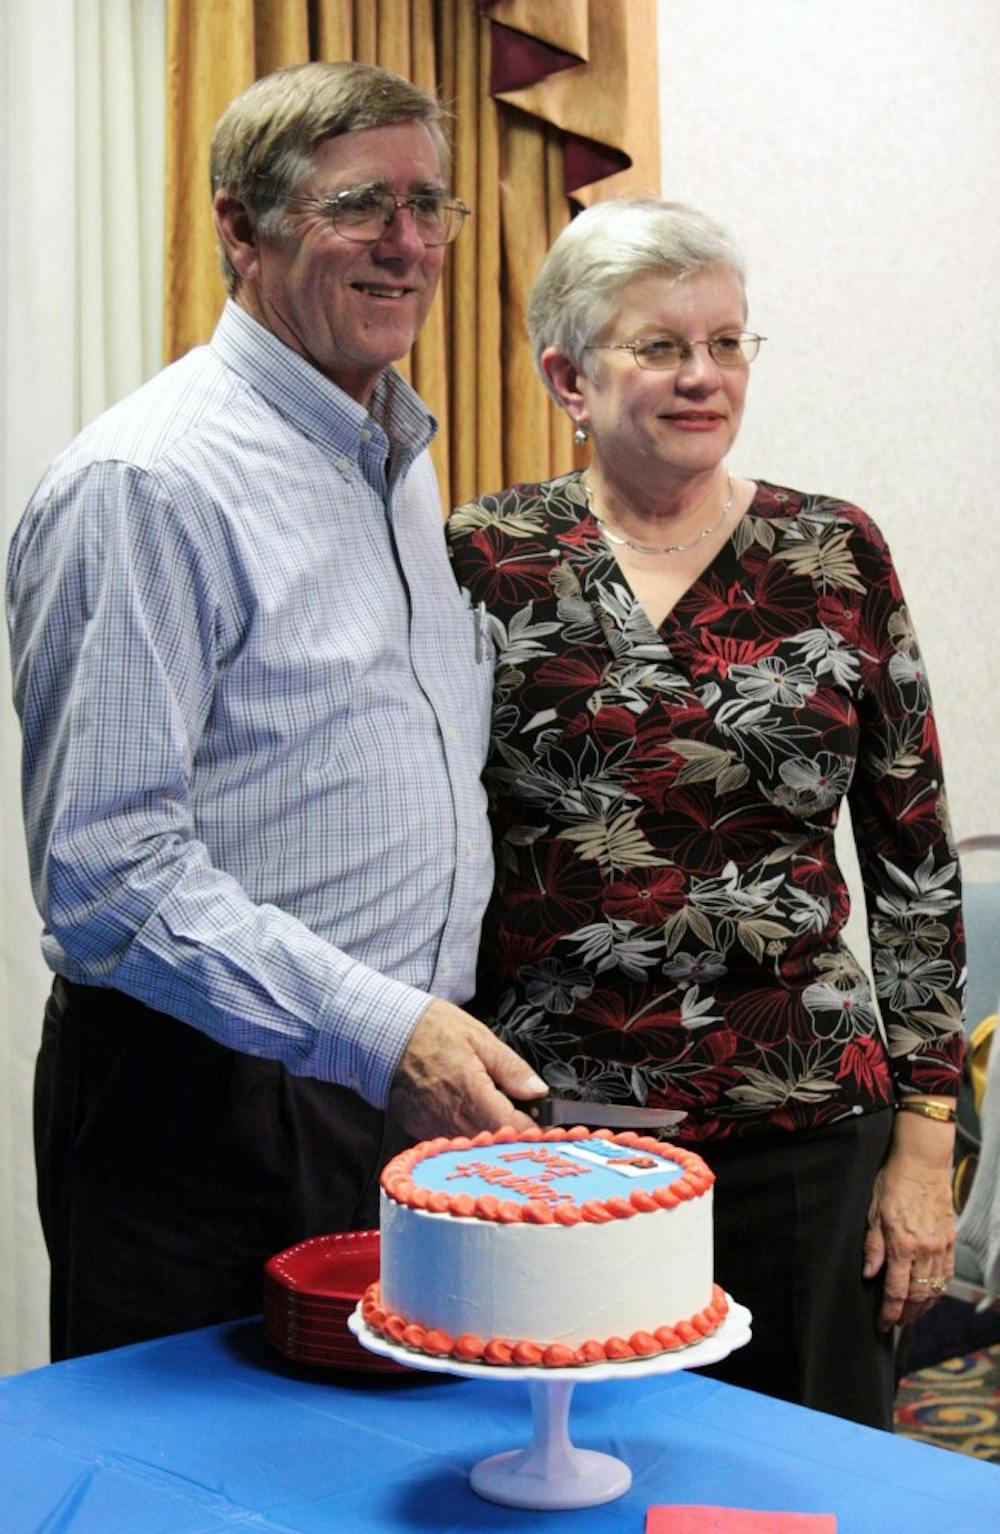 Earl McKee, Democratic candidate for the Orange County Board of COmmissioners, stands with his wife, Sandra, Tuesday evening before cutting into a cake to celebrate his victory. 